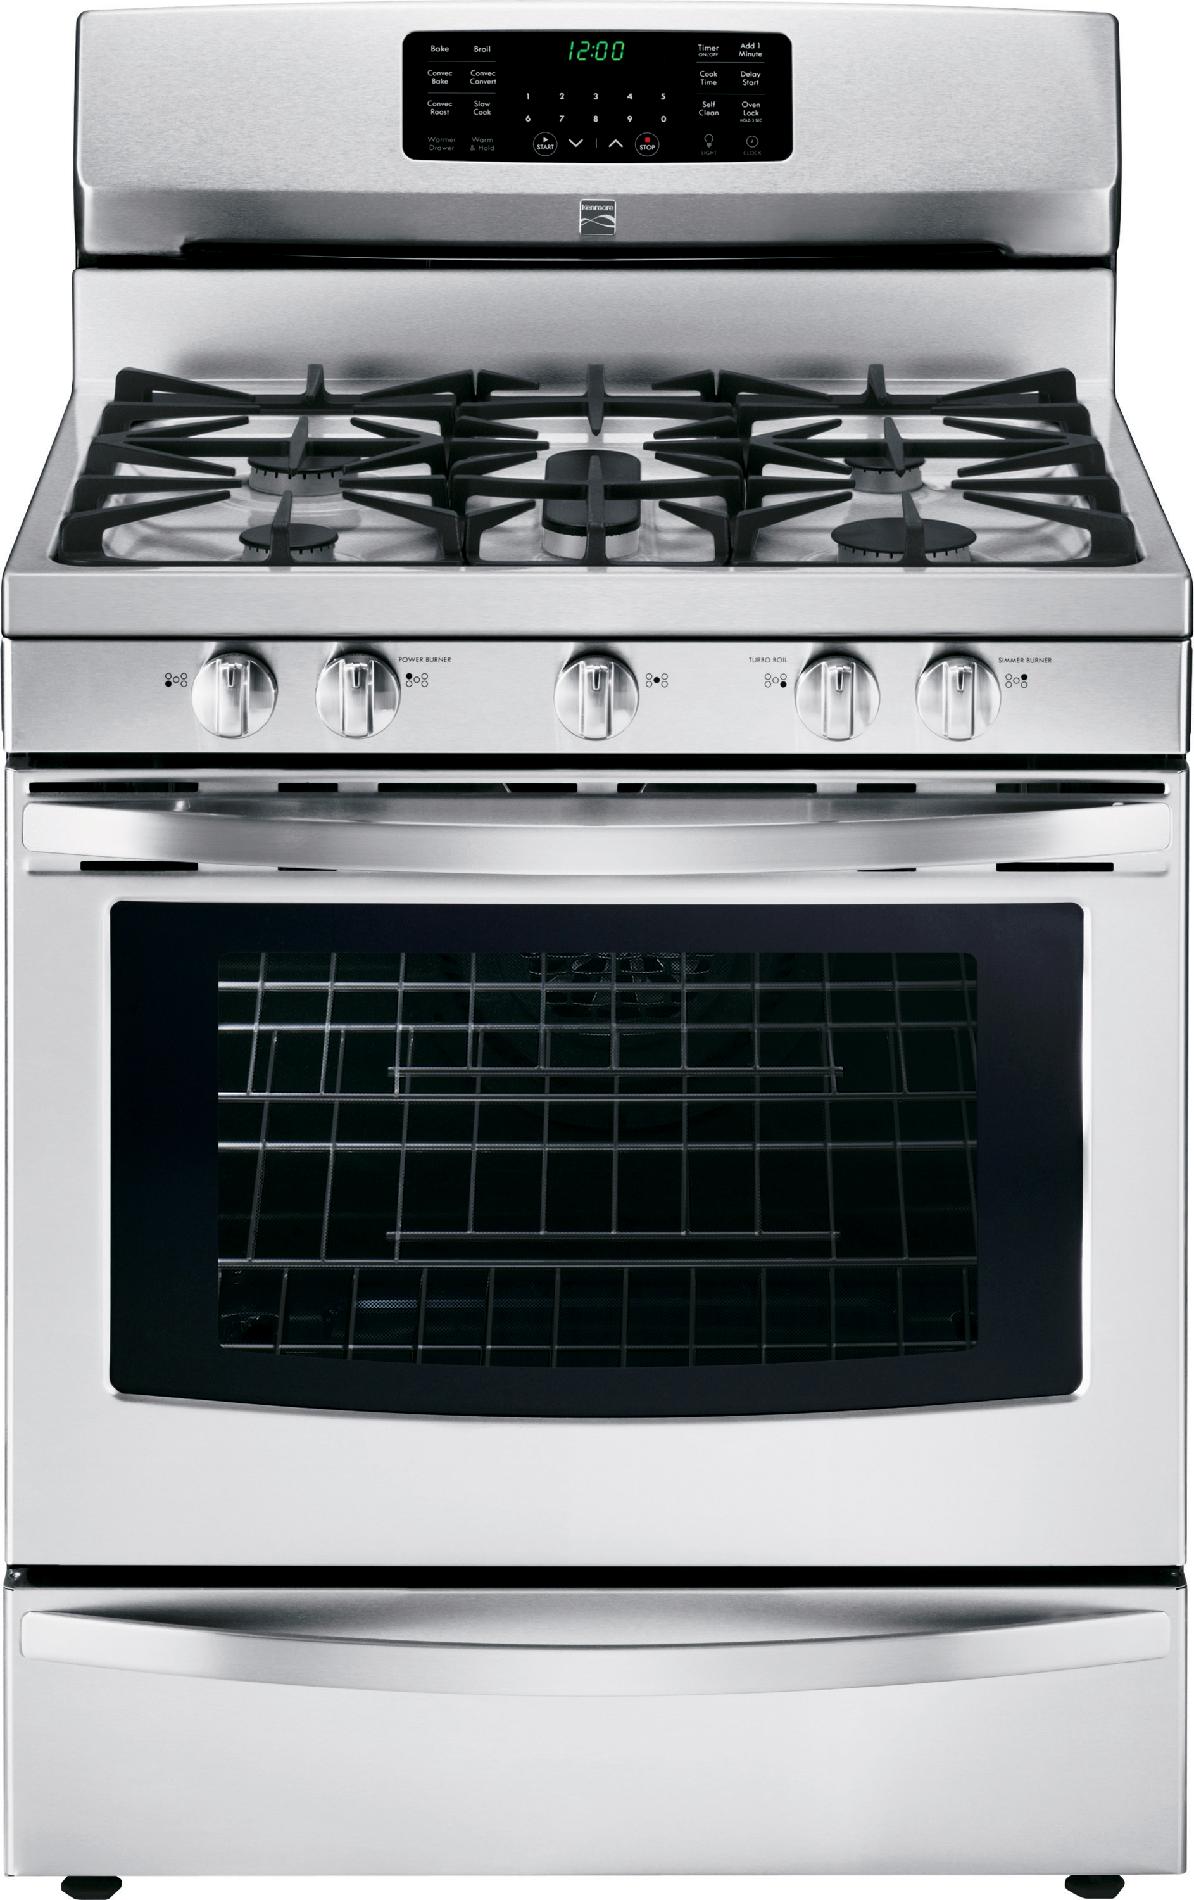 Kenmore 5.6 cu. ft. Gas Range w/ Convection Oven - Stainless Steel